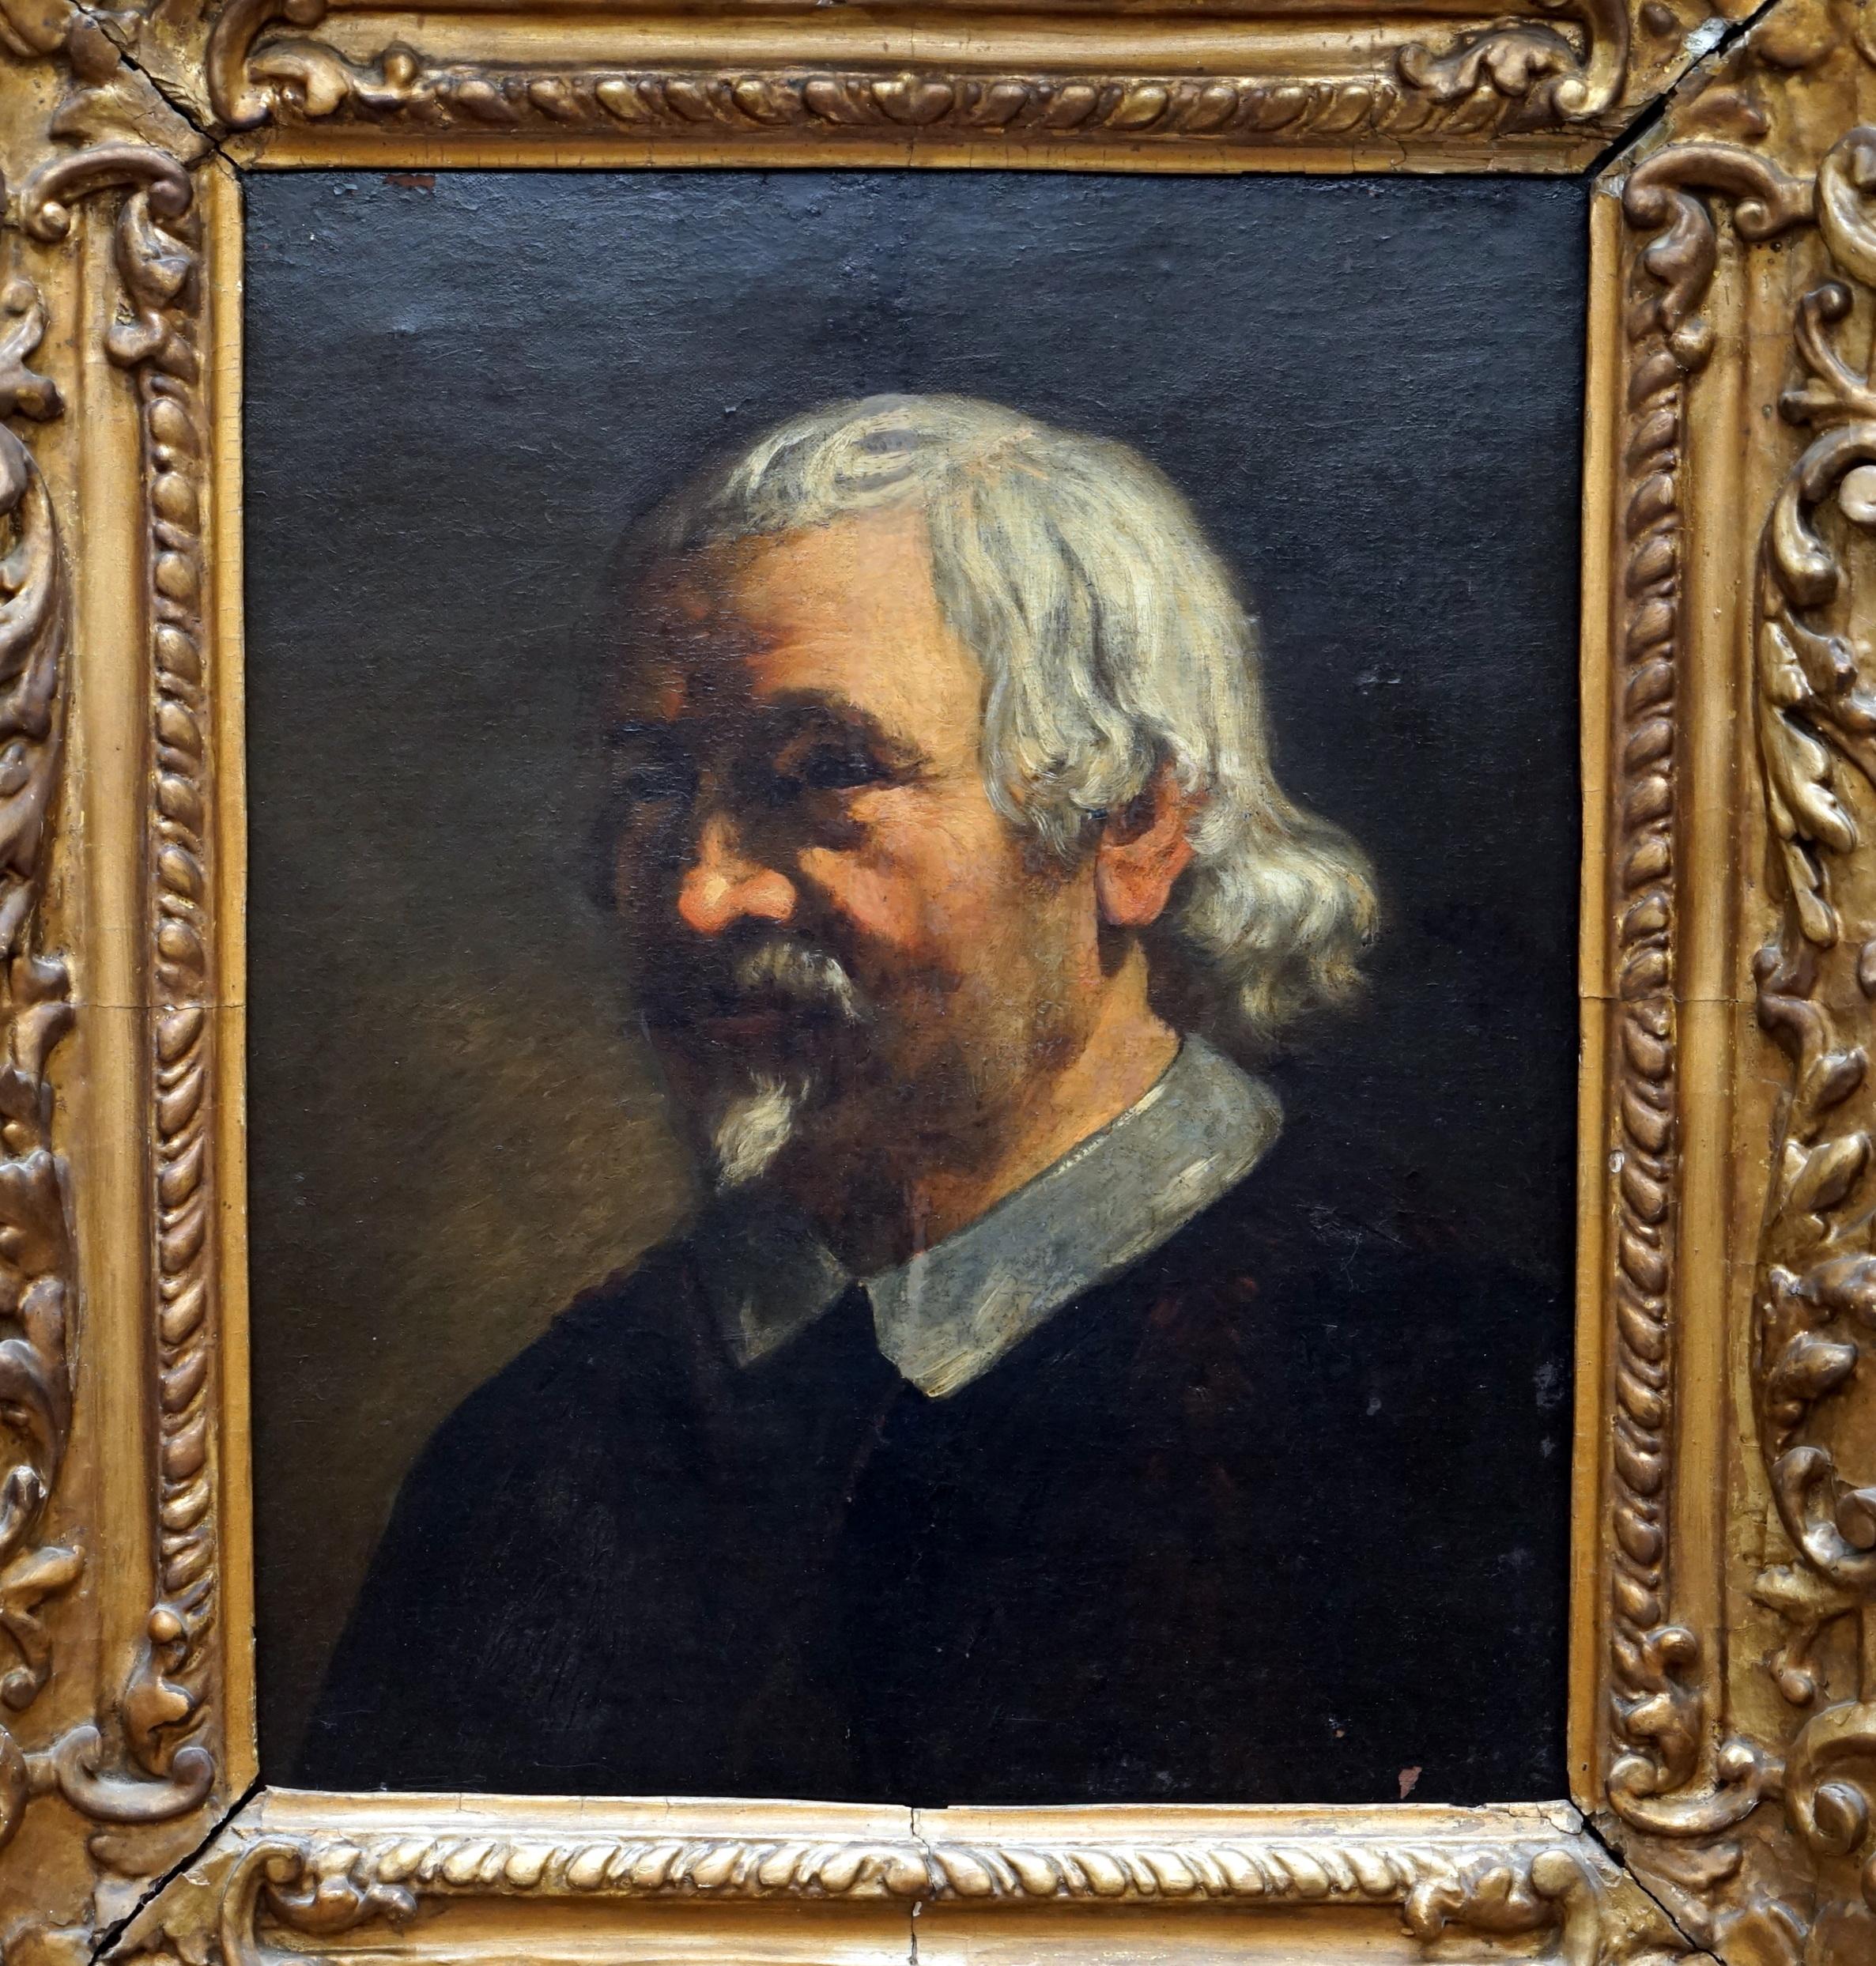 We are delighted to offer for sale this lovely original 17th century Dutch, oil on canvas painting of a noble gentleman. 

The condition of the oil is very good, the frame is distressed around the joints especially to the top right, I haven’t